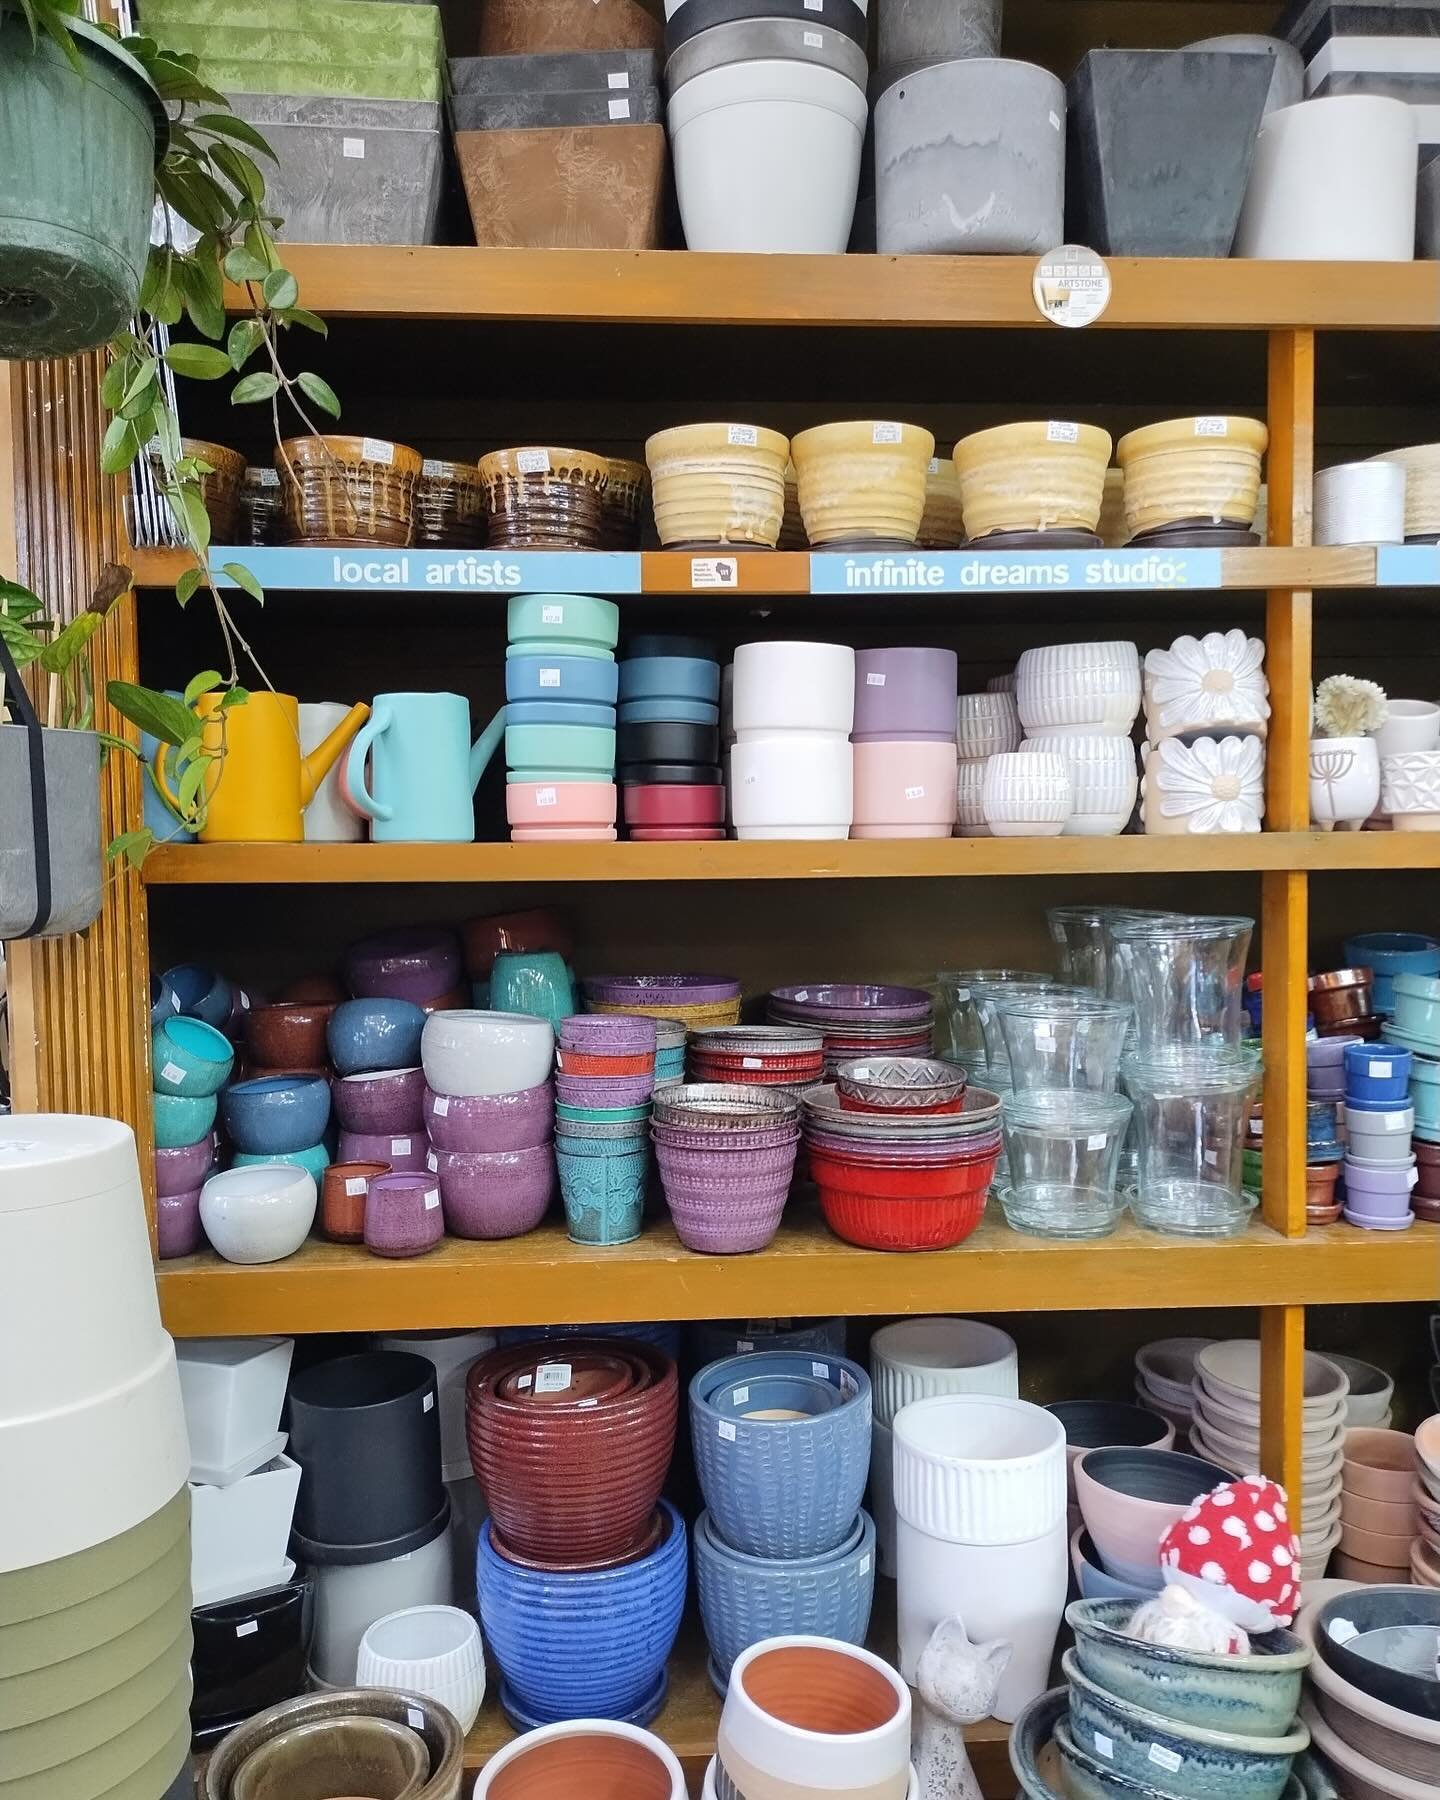 We have so many great pots in stock right now. Come get some new digs for your house plants before we all get distracted spending all our time outdoors next month. #potsareplantspants #plantpot #toomanychoices #iwantoneofeverything #timetorepot #hous